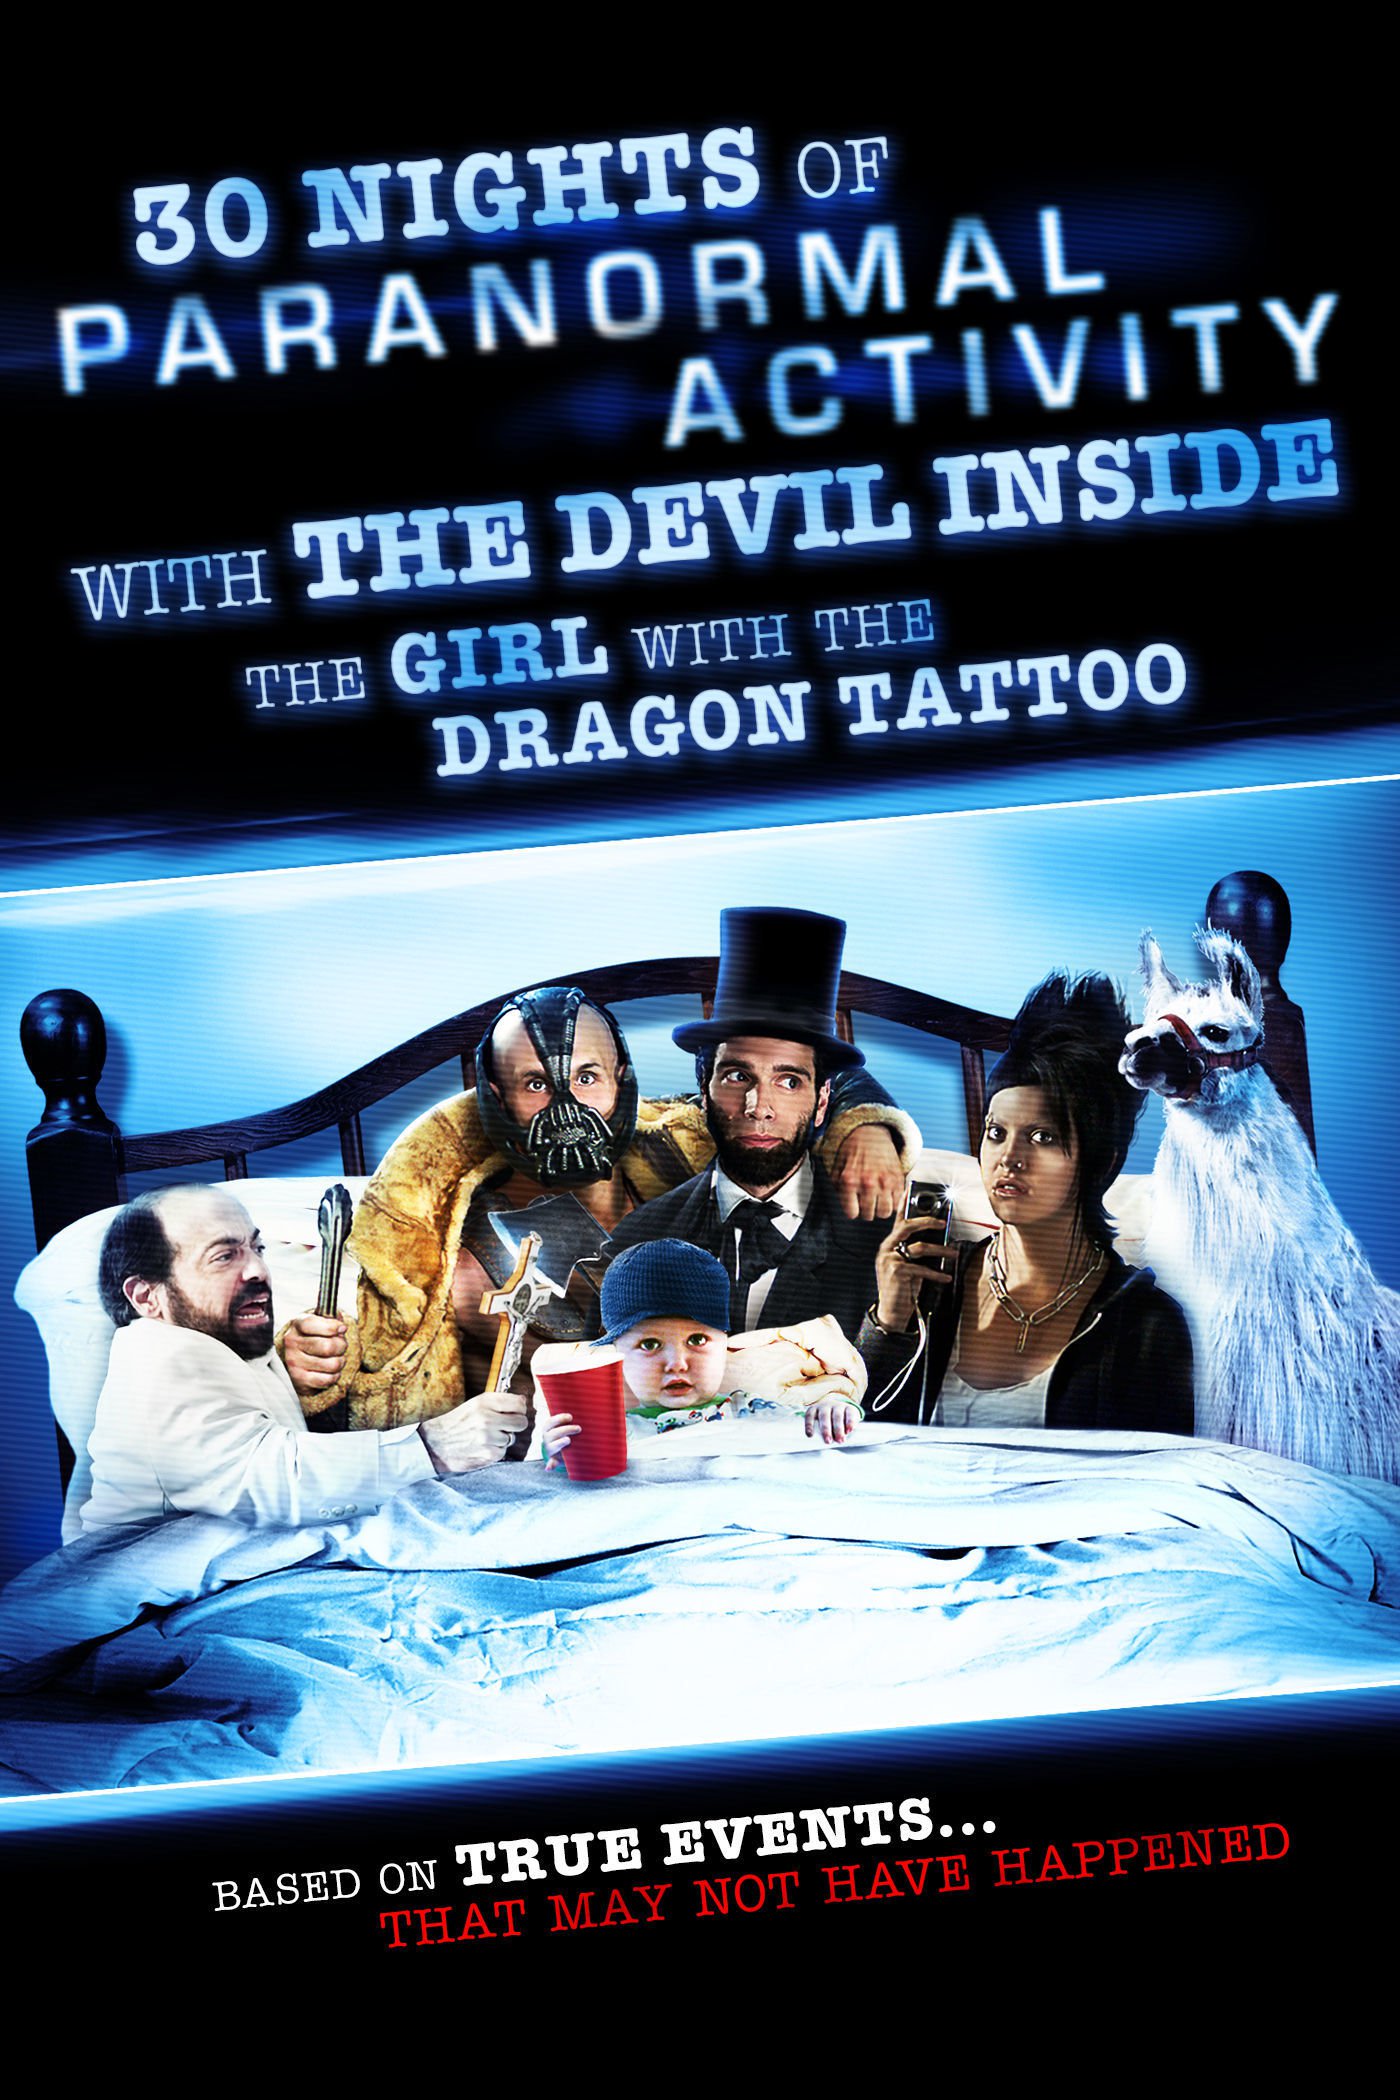 affiche du film 30 Nights of Paranormal Activity With the Devil Inside the Girl With the Dragon Tattoo